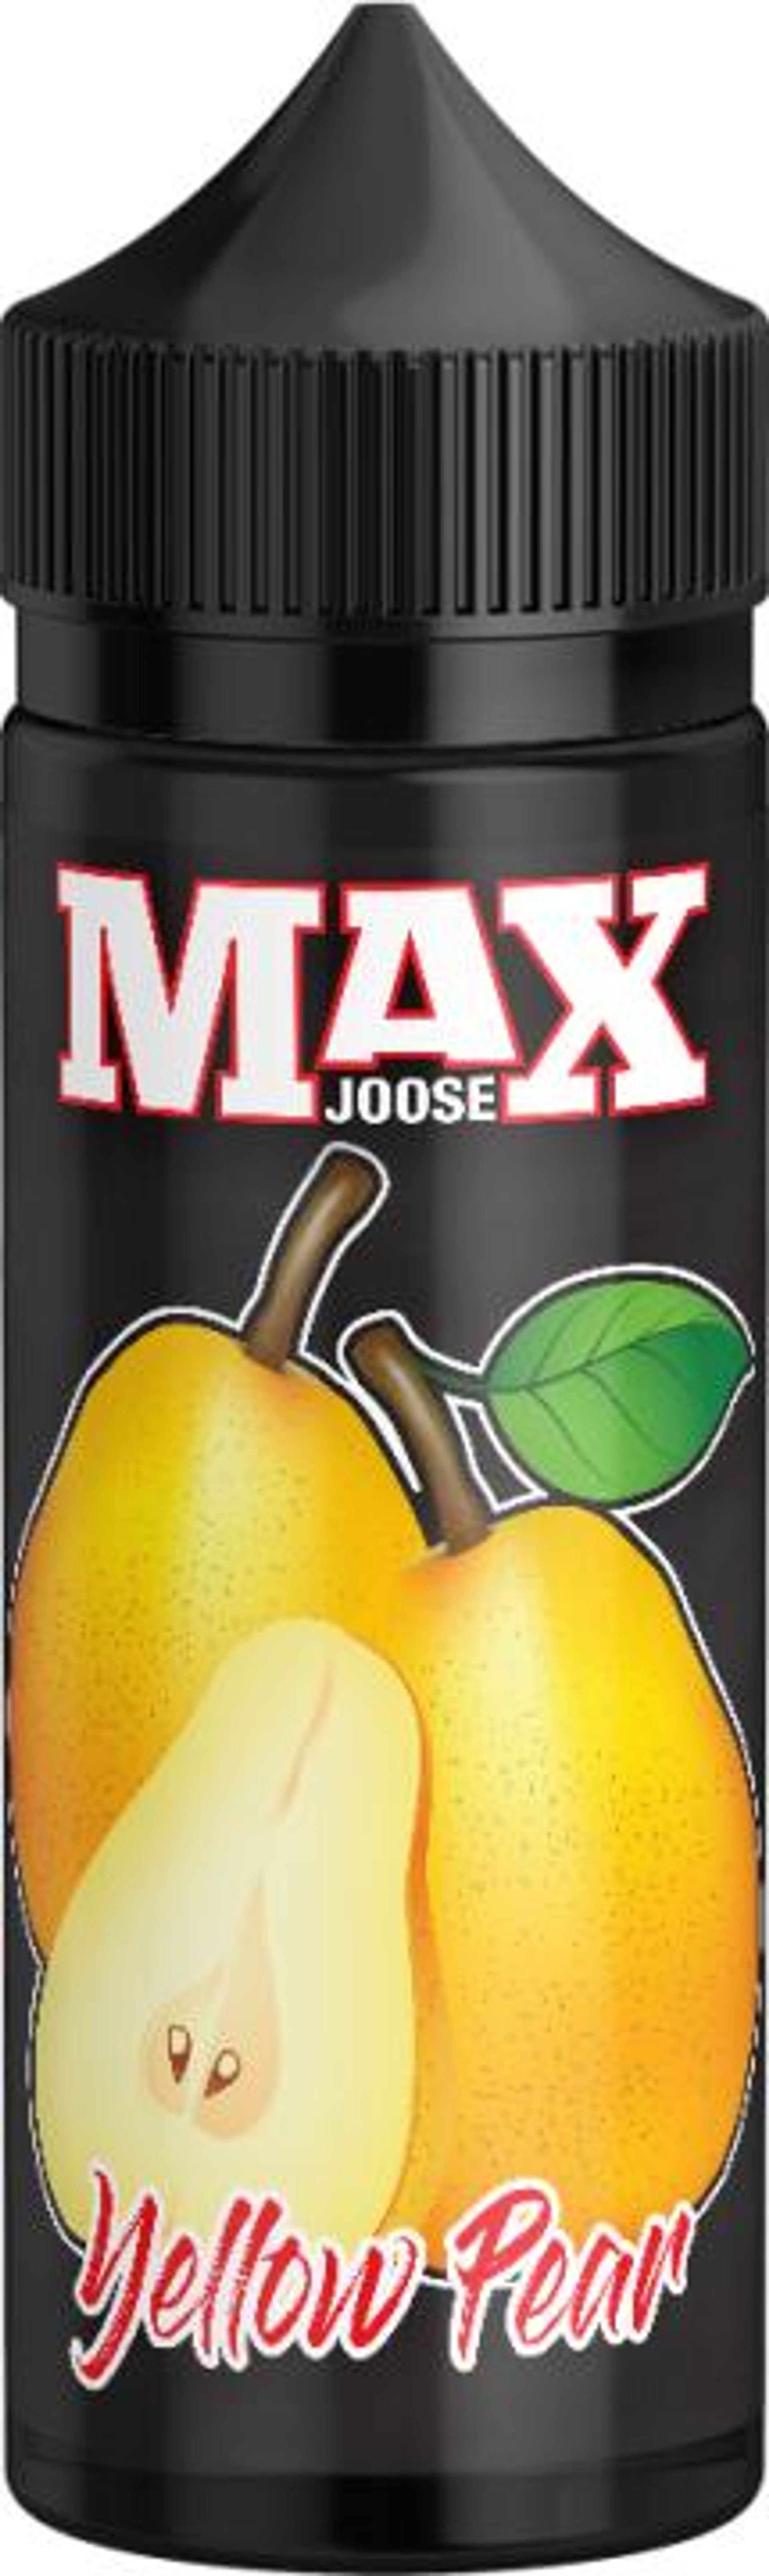 Image of Yellow Pear by Max Joose